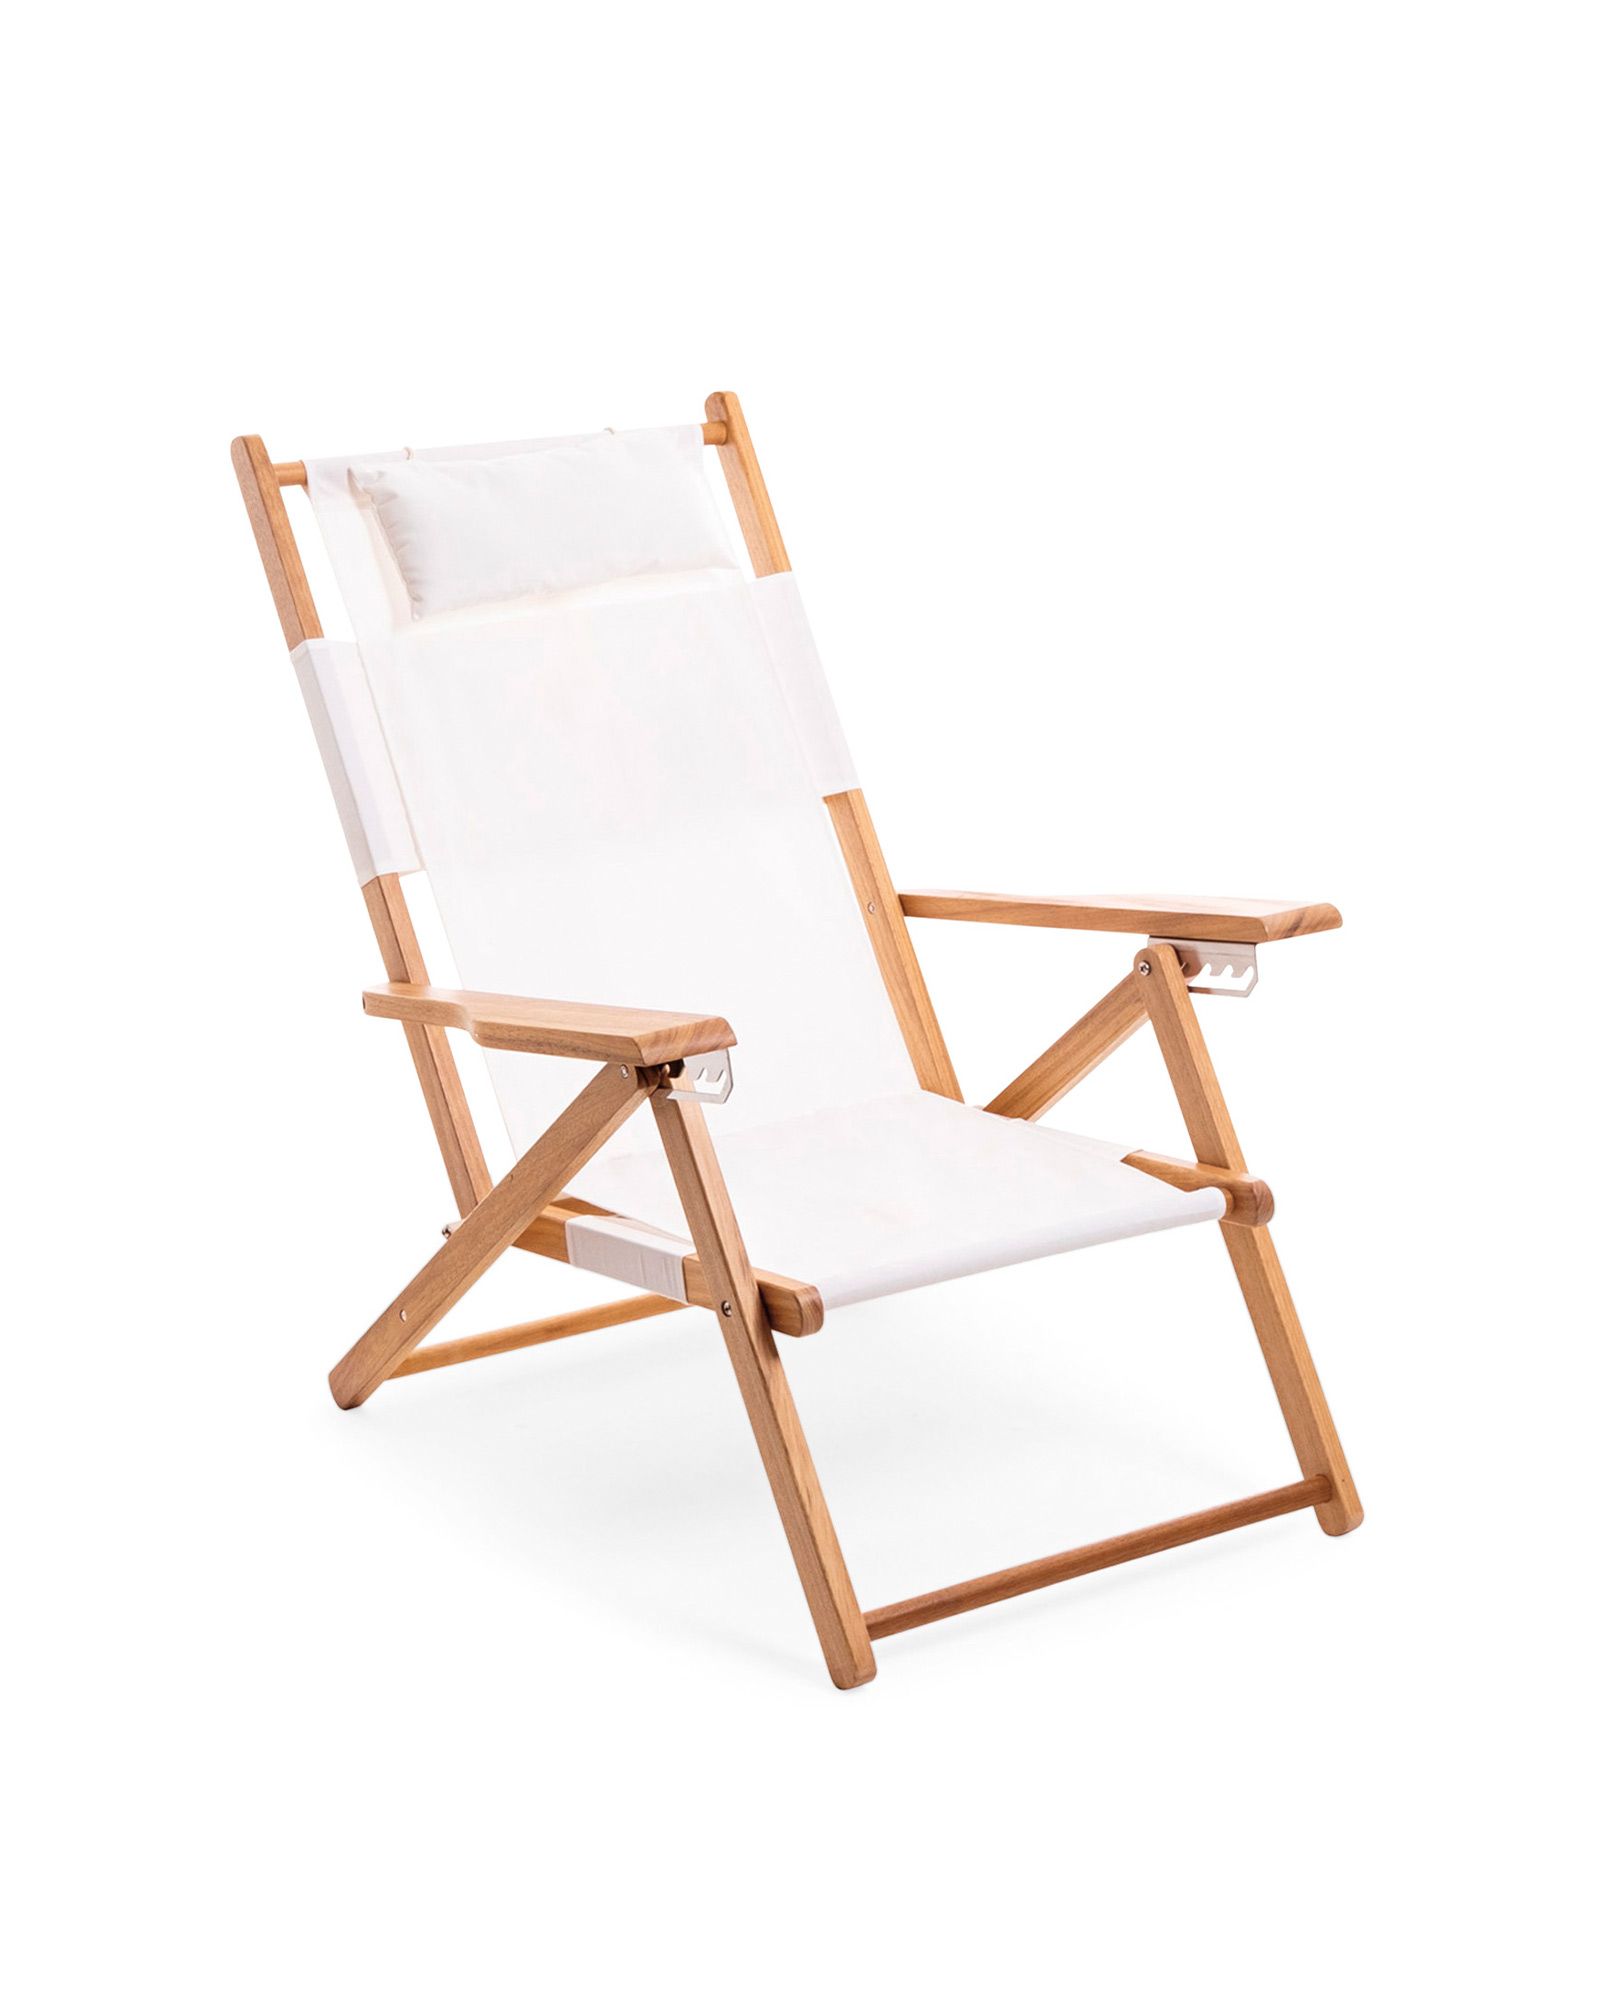 Teak Beach Chair | Serena and Lily